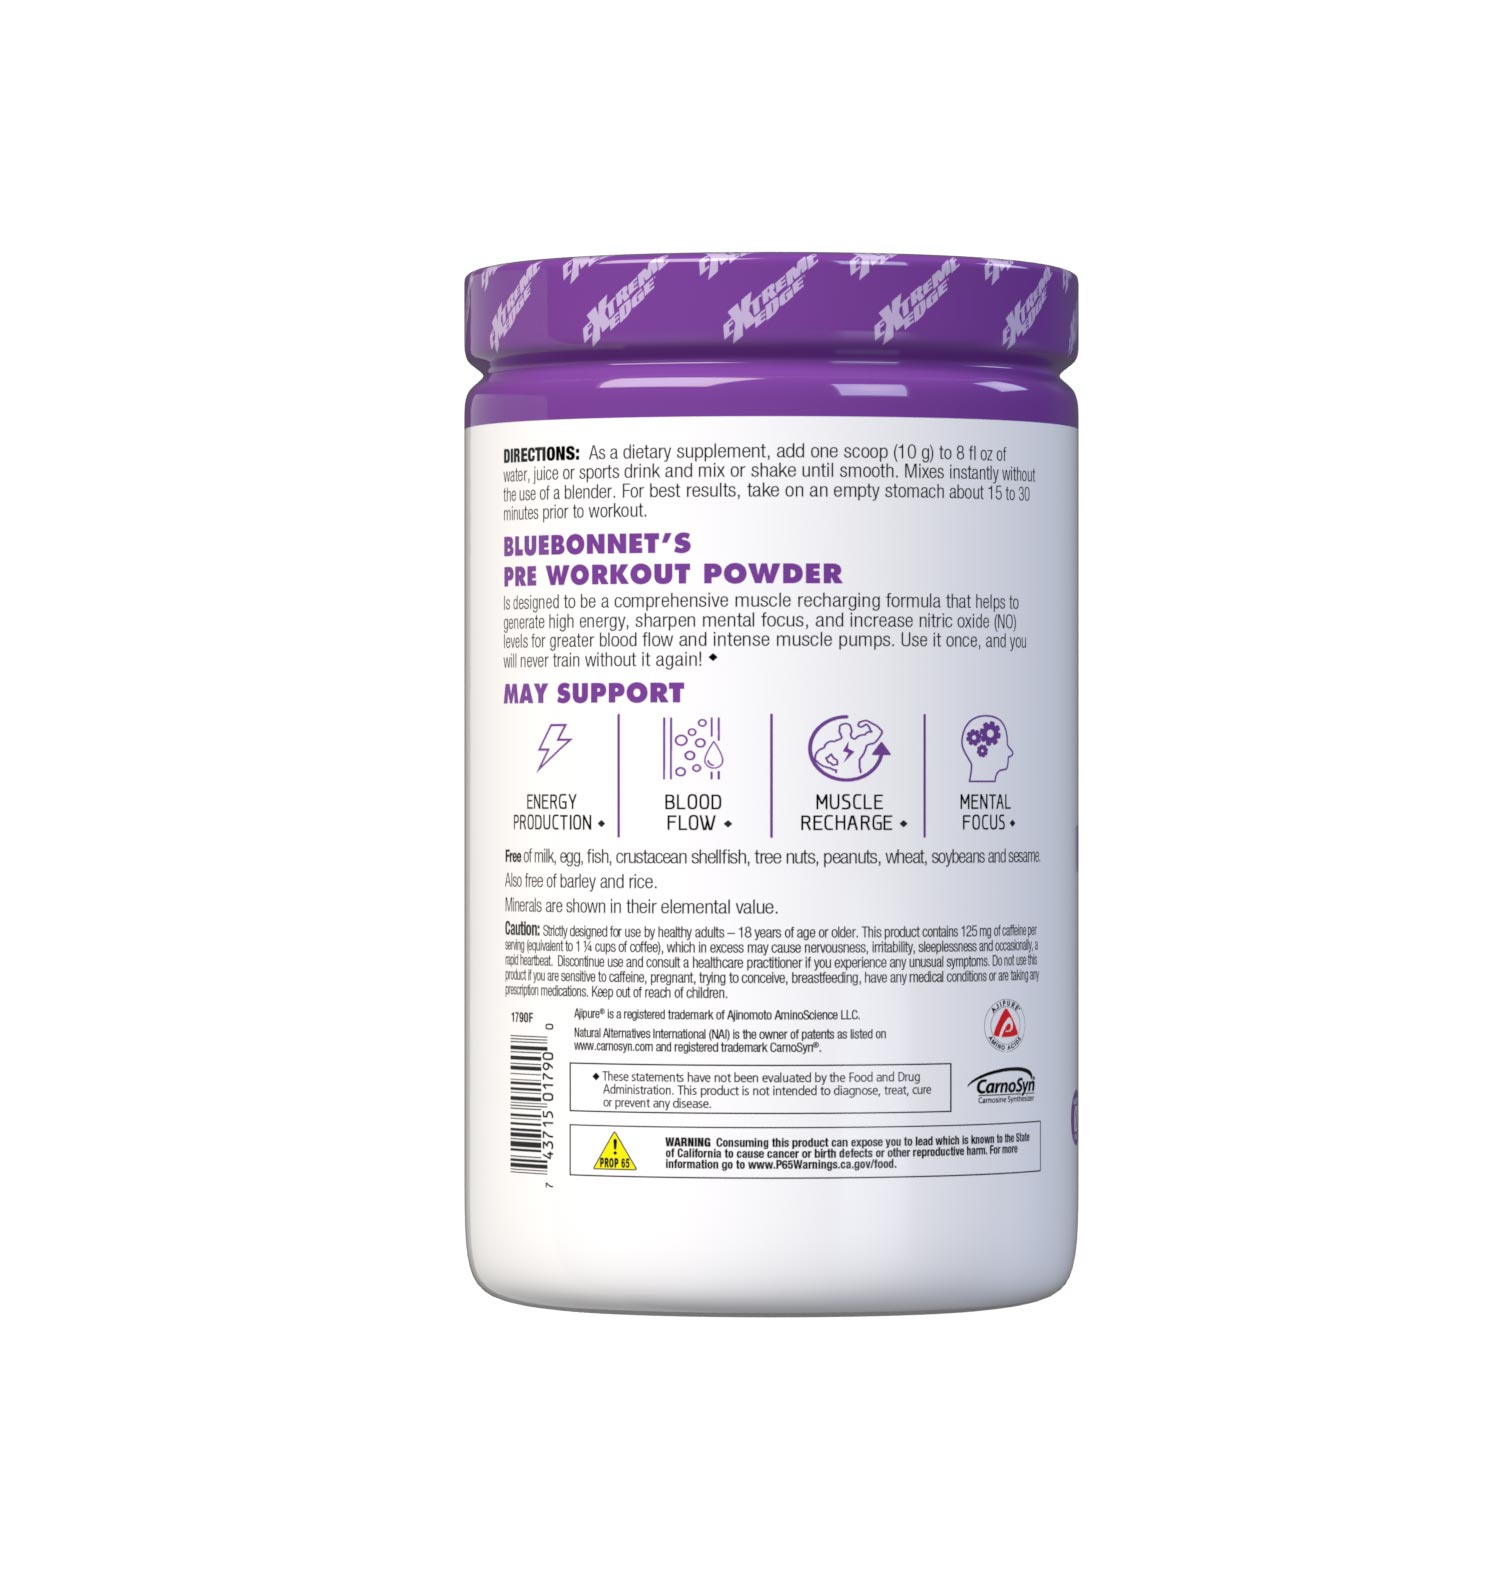 Bluebonnet's Grape Flavored Pre Workout powder is designed to be one of the most comprehensive, muscle recharging formulas ever created. This triple-turbo, super-charged formula generates high energy, sharpens mental concentration, and increases nitric oxide (NO) levels for greater blood flow and intense muscle pumps. Description panel. #size_1.32 lb